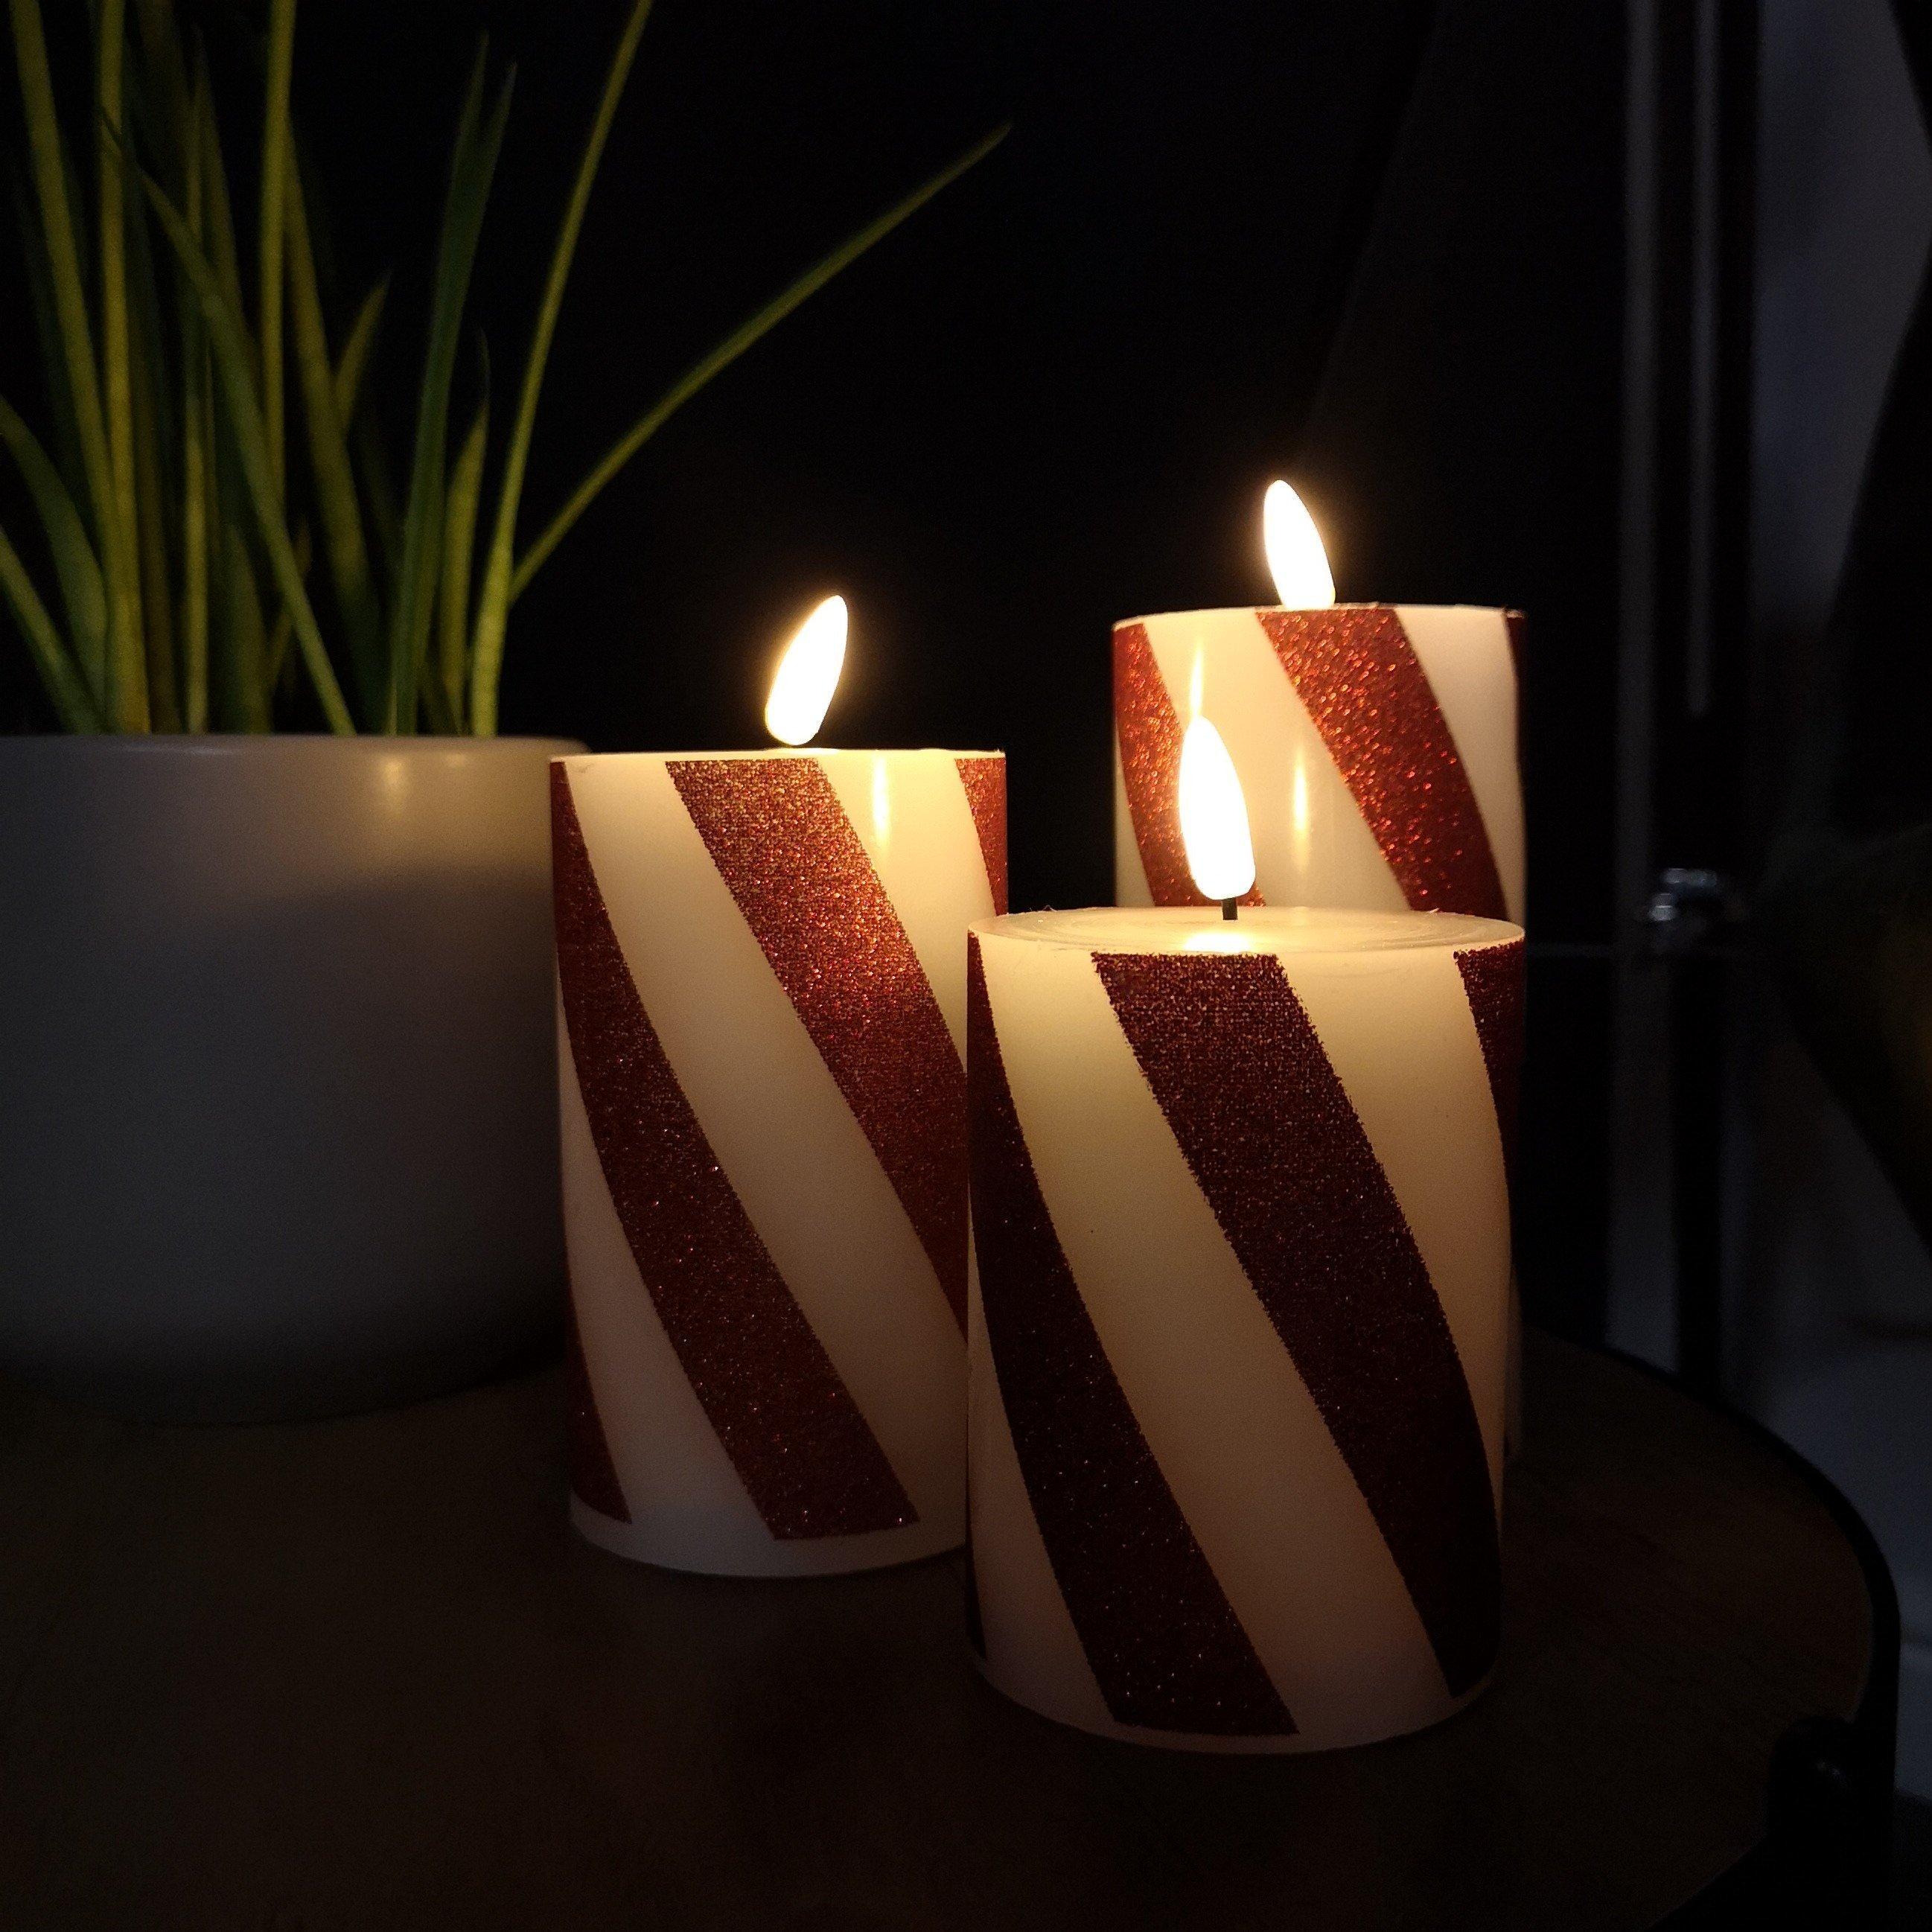 Set of 3 LED Red and White Stripe Flickering Wax Candle Christmas Decoration - image 1